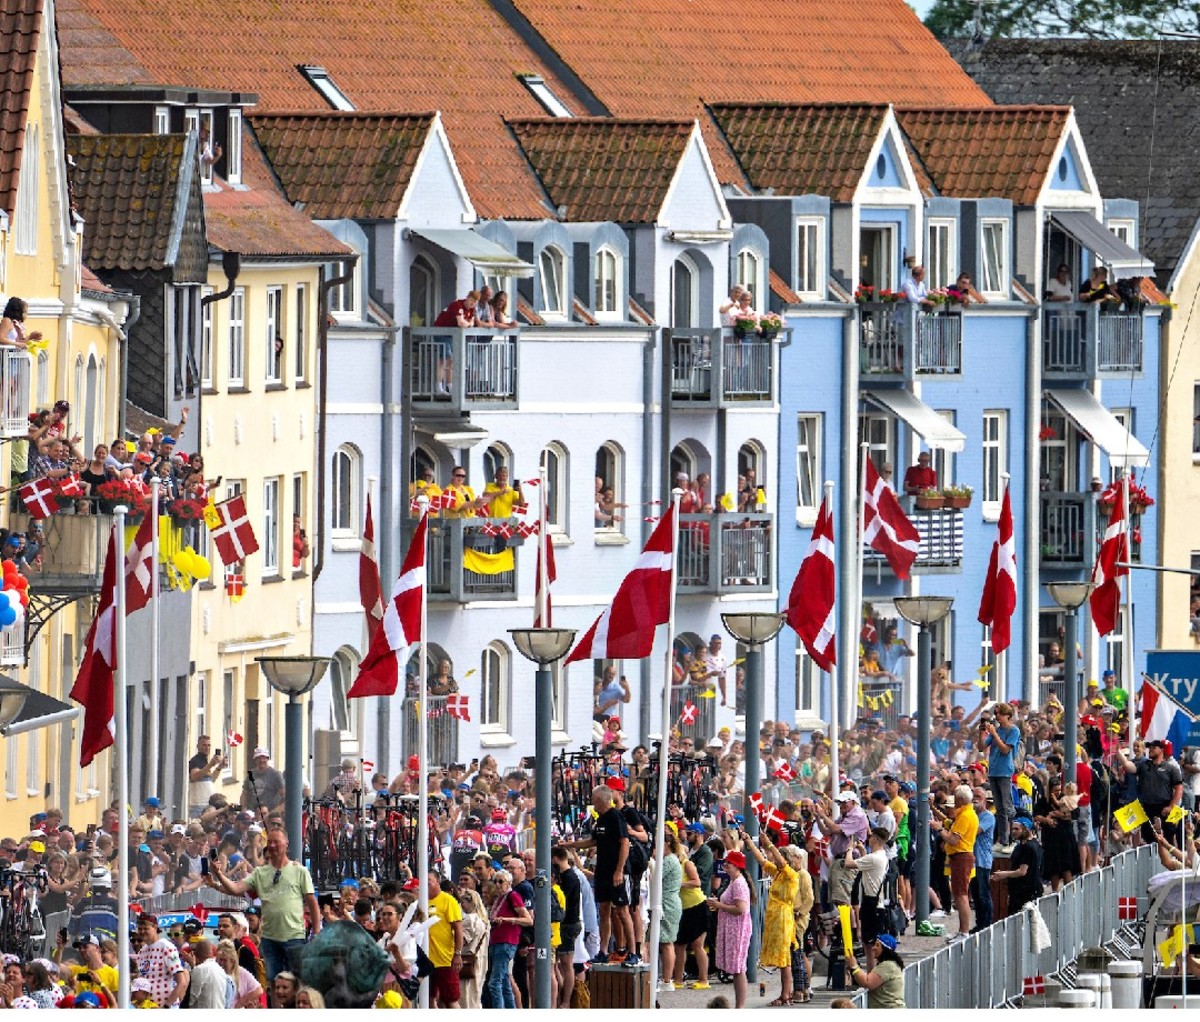 Row of flagged houses in a Danish town